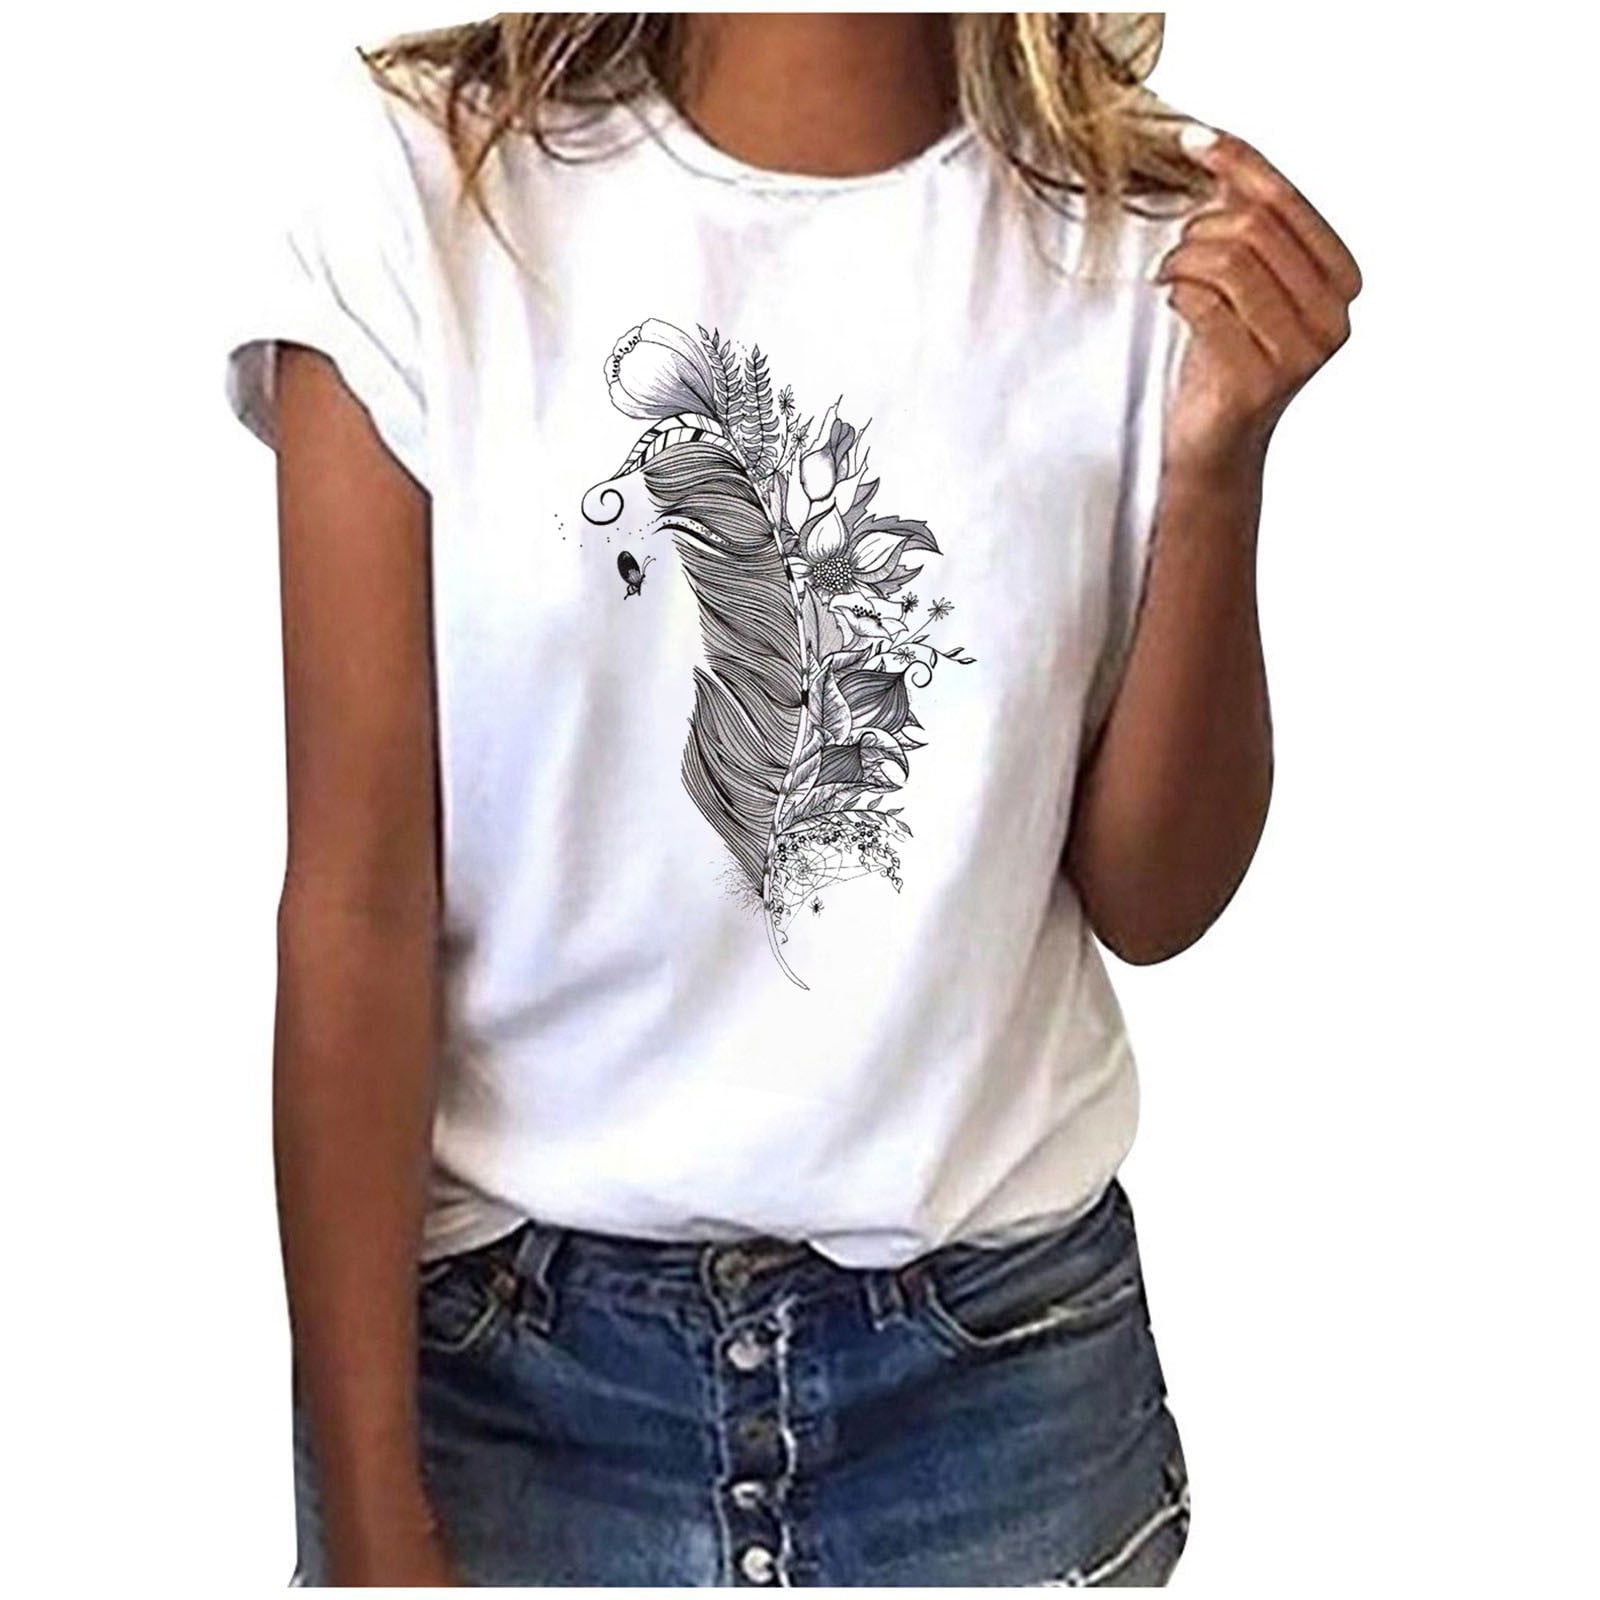 JDEFEG Summer Tee Shirts Women Shirt for Women Easter Printing O Neck  Outdoor Fashion Shirt Tops Blank Shirts for Heat Transfer Polyester Grey S  